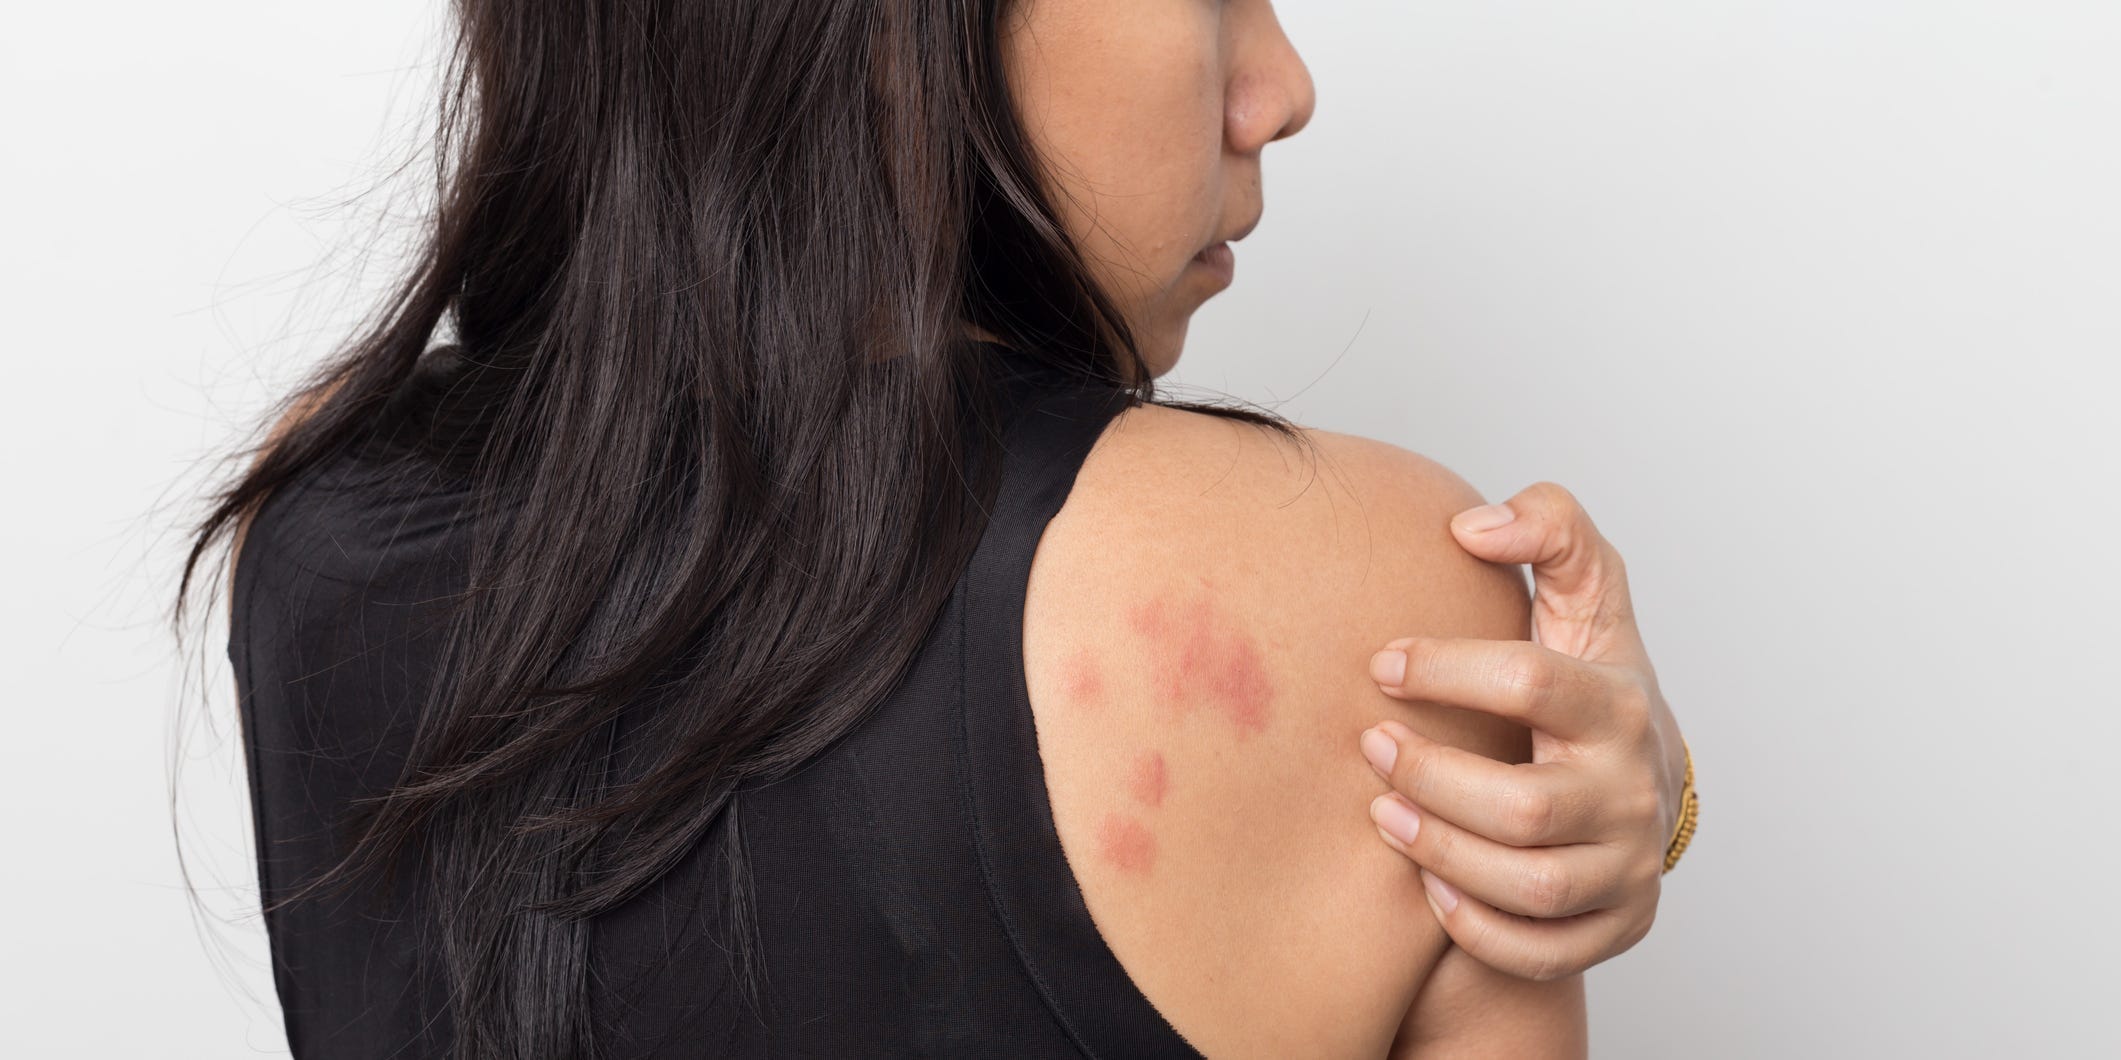 stress rash and hives on woman's back